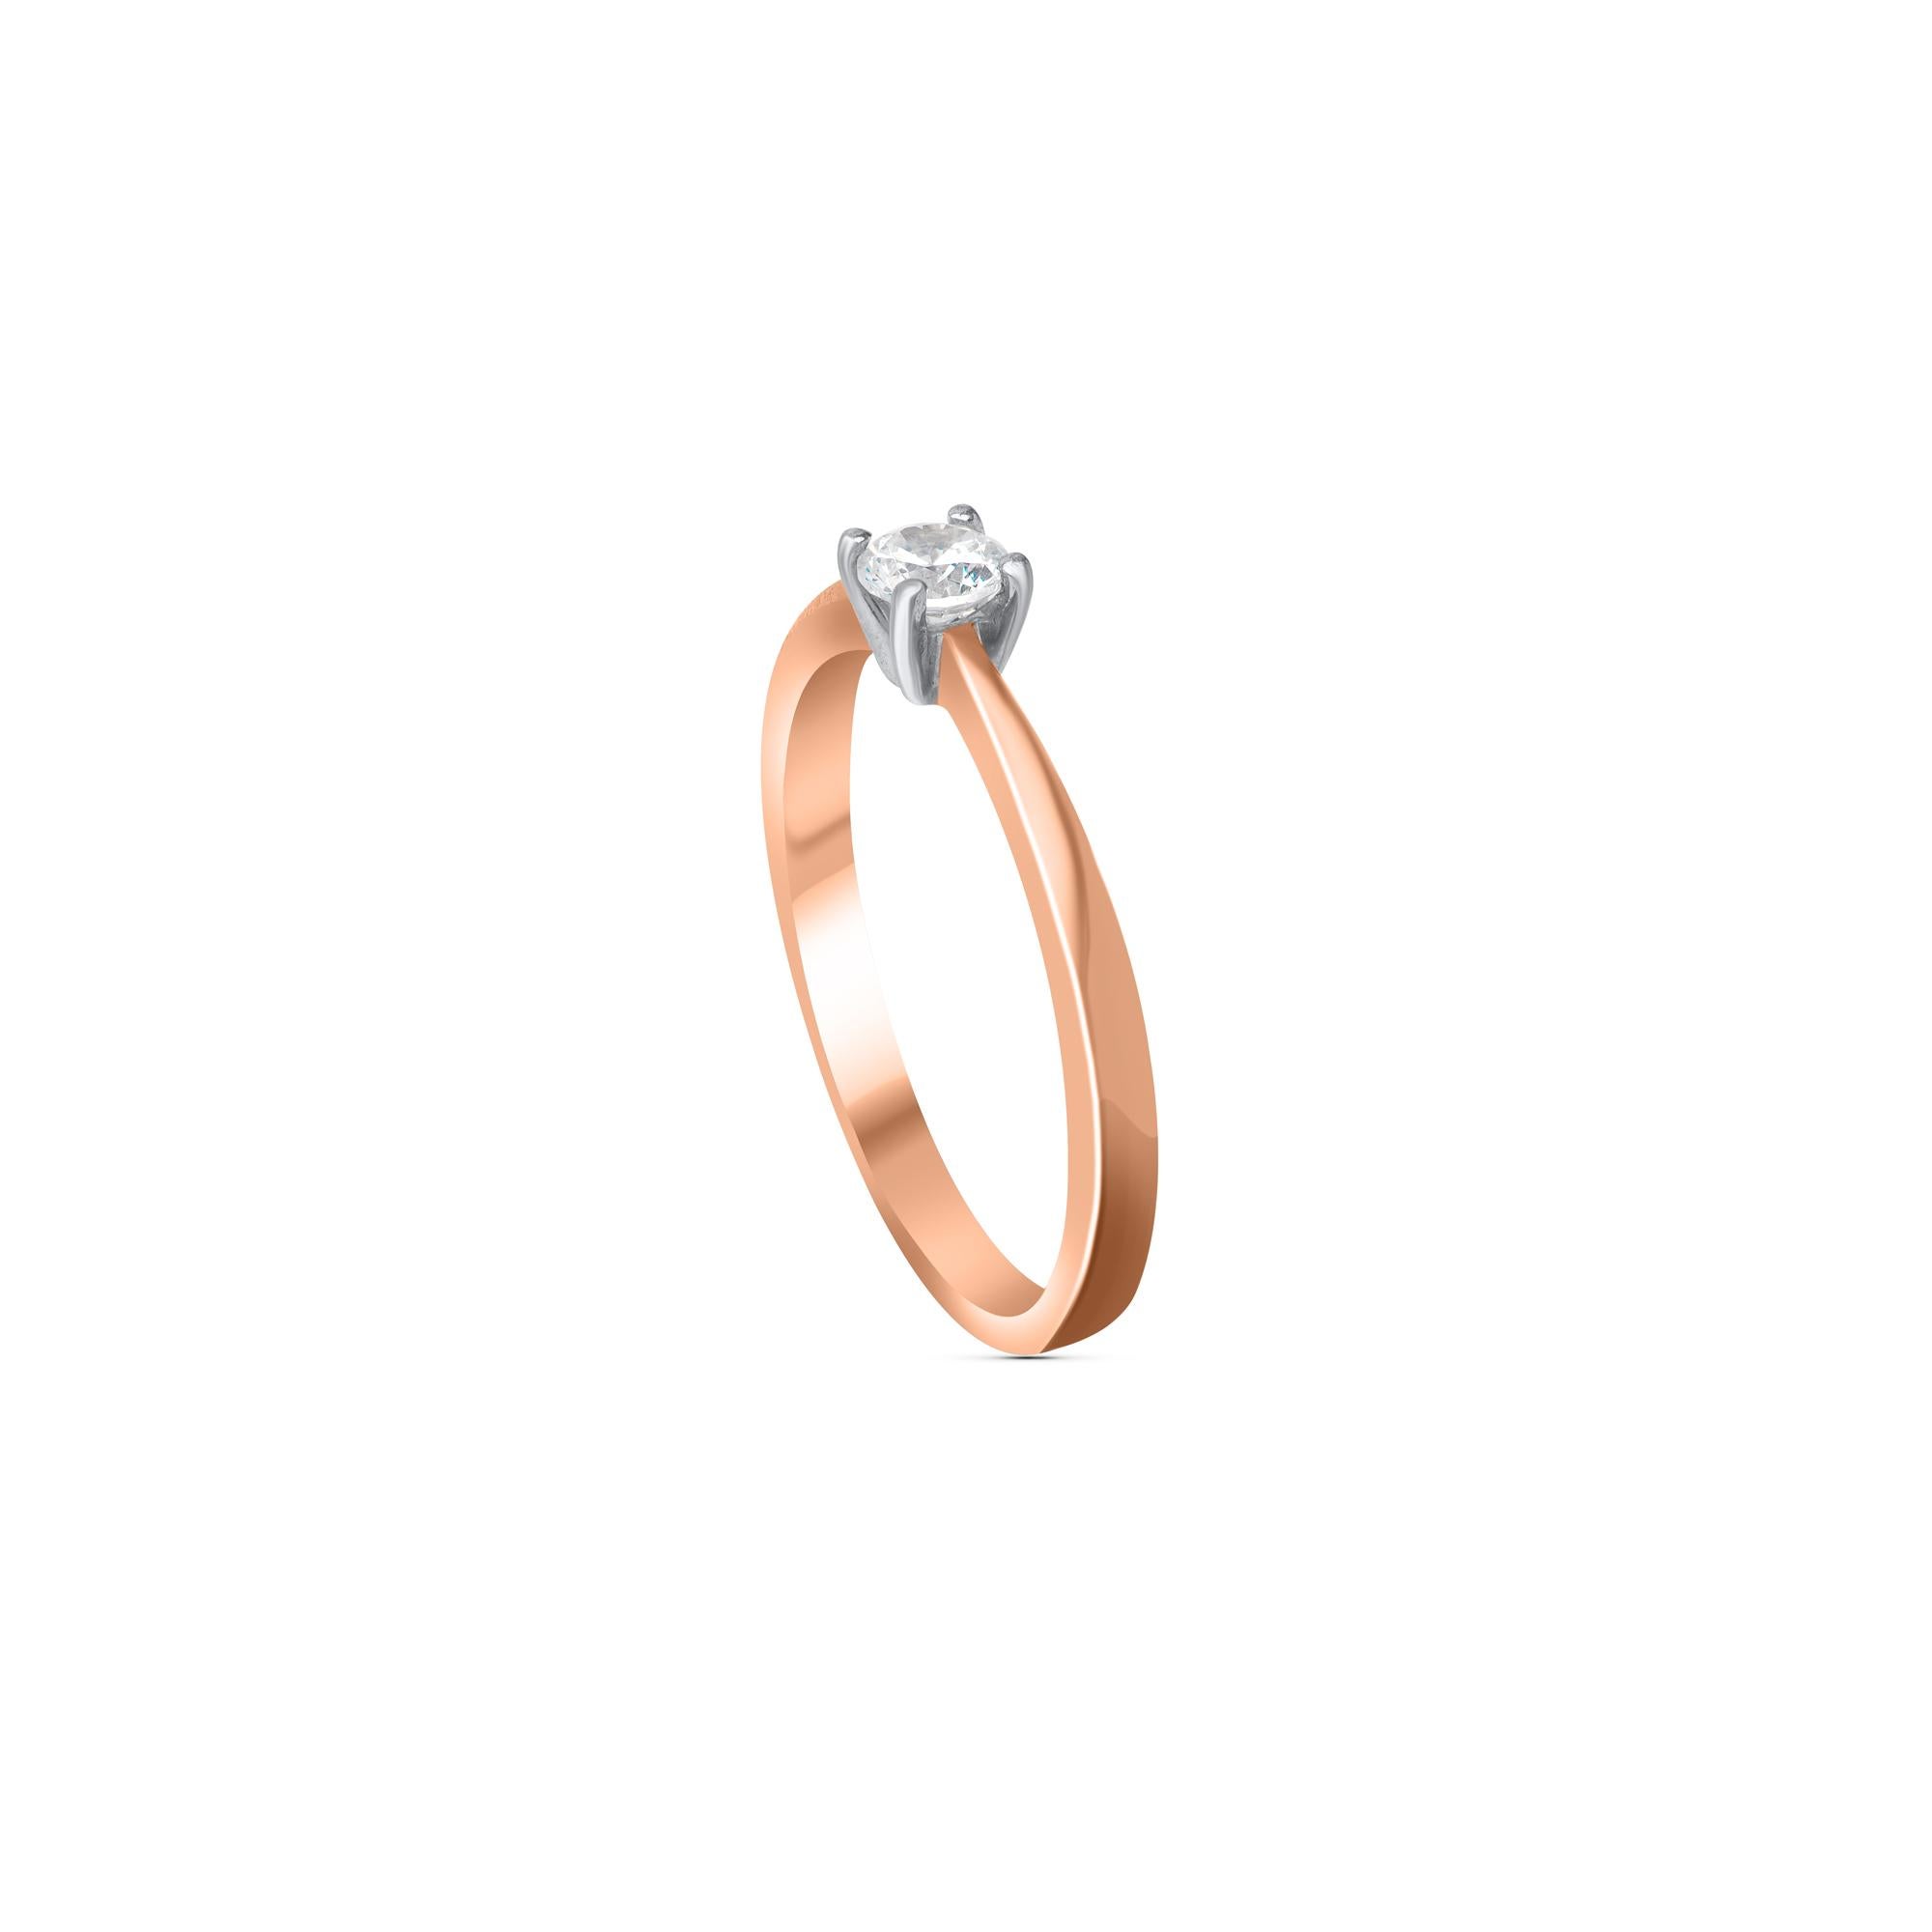 When in doubt, classic is the way to go. Beautifully crafted by our in-house experts in 18 kt rose gold and embedded with 1 brilliant diamond in prong setting. Diamonds are graded H-I Color, I1 Clarity. 

Metal color and ring size can be customized